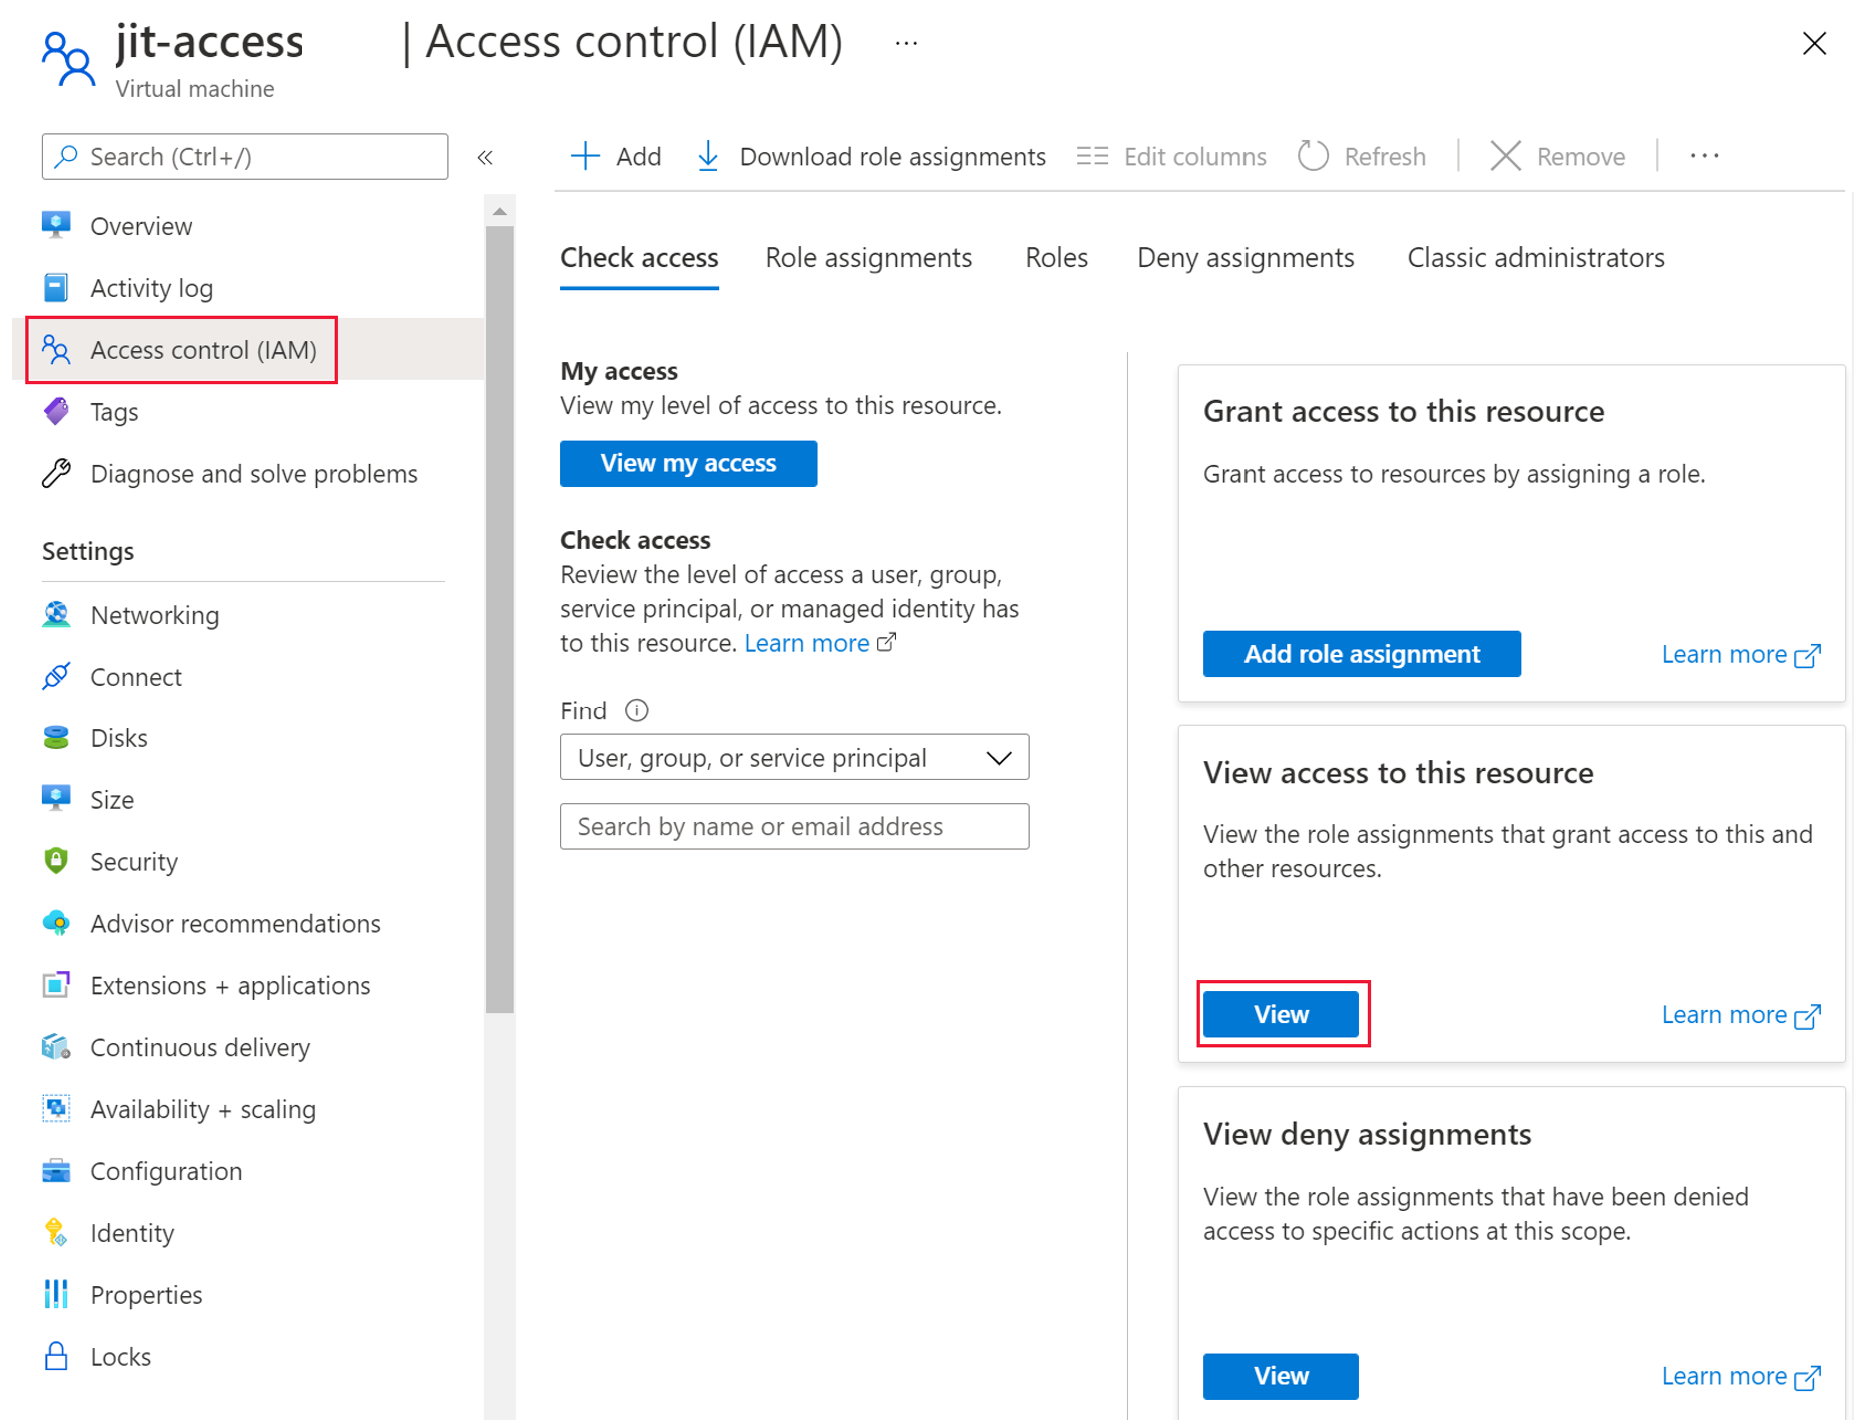 A screenshot showing a VM’s Access control (IAM) settings. The View button for View access to this resource is highlighted.